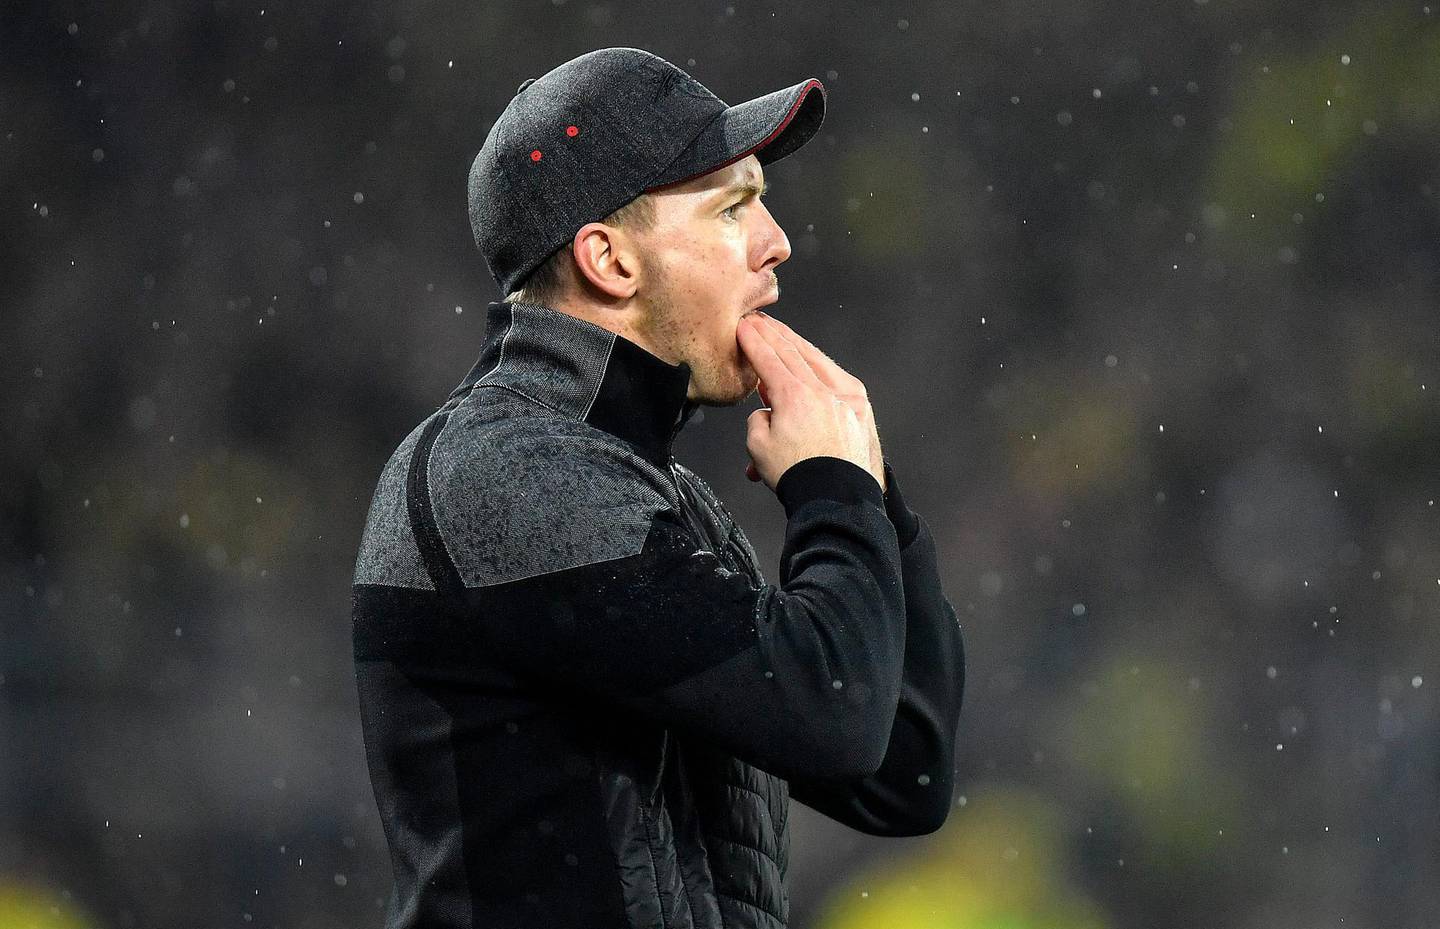 Leipzig's manager Julian Nagelsmann reacts to his players during the German Bundesliga soccer match between Borussia Dortmund and RB Leipzig in Dortmund, Germany, Tuesday, Dec. 17, 2019. The match ended 3-3. (AP Photo/Martin Meissner)